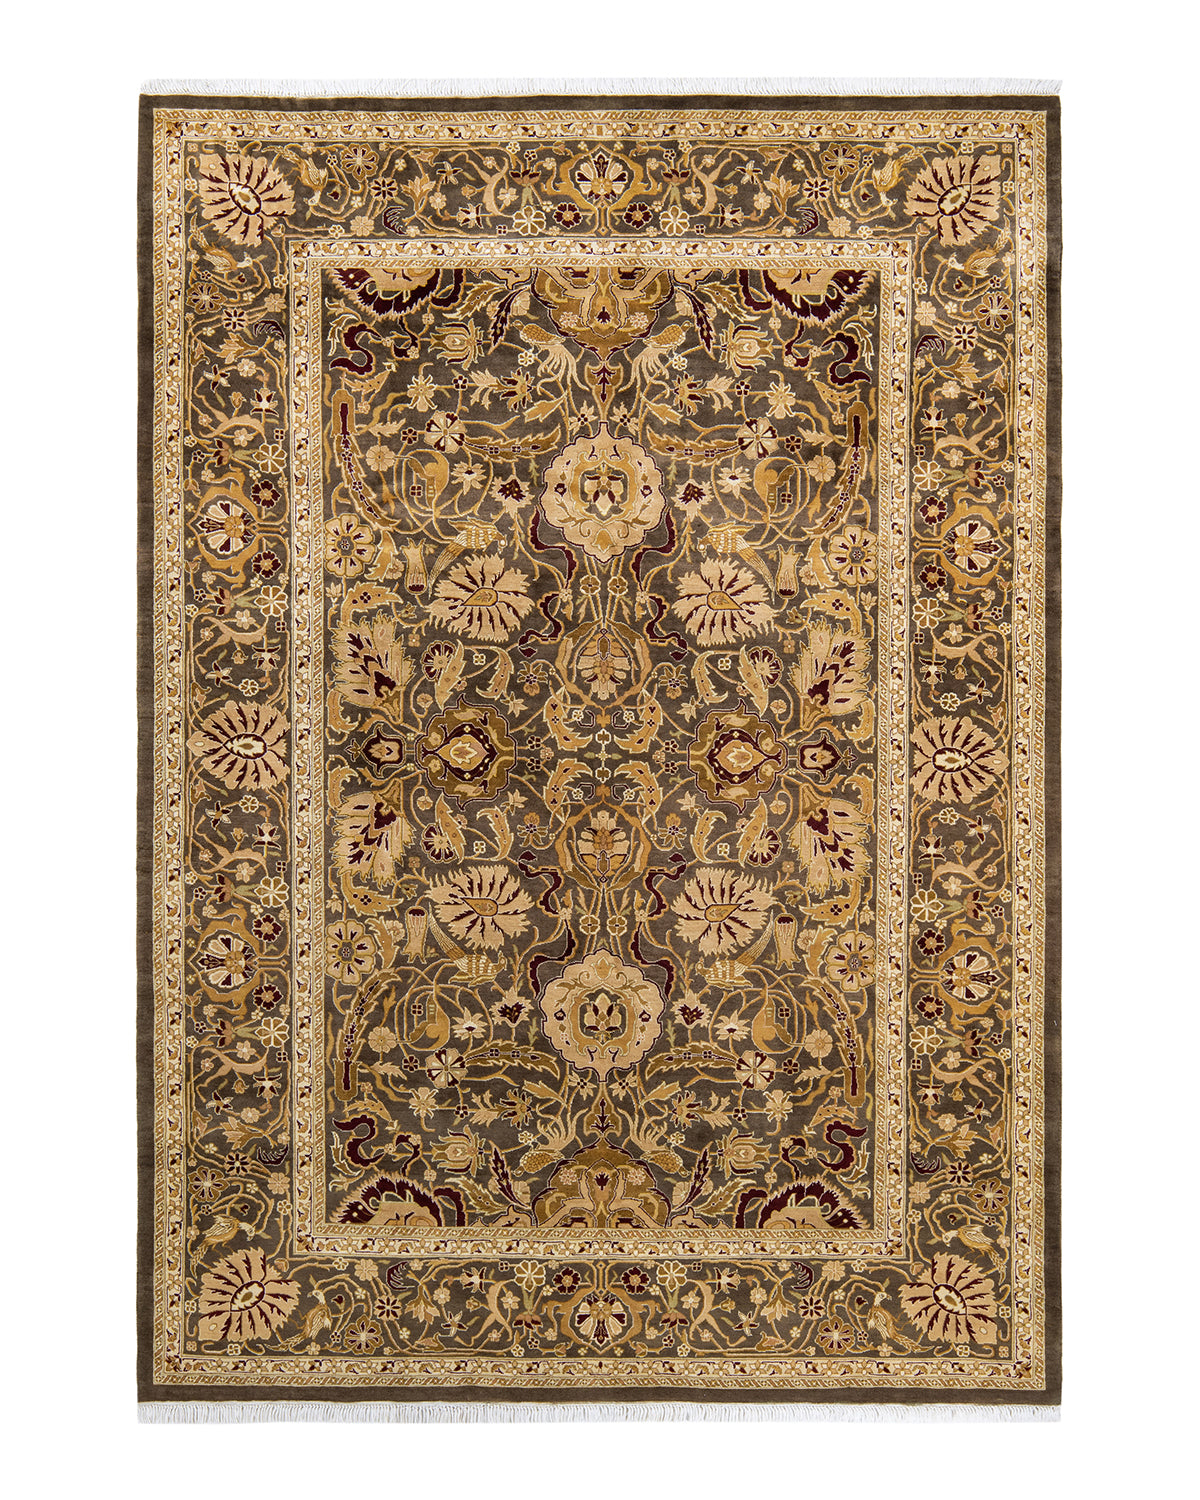 Mogul, One-of-a-Kind Hand-Knotted Area Rug  - Brown, 6' 2" x 8' 10"